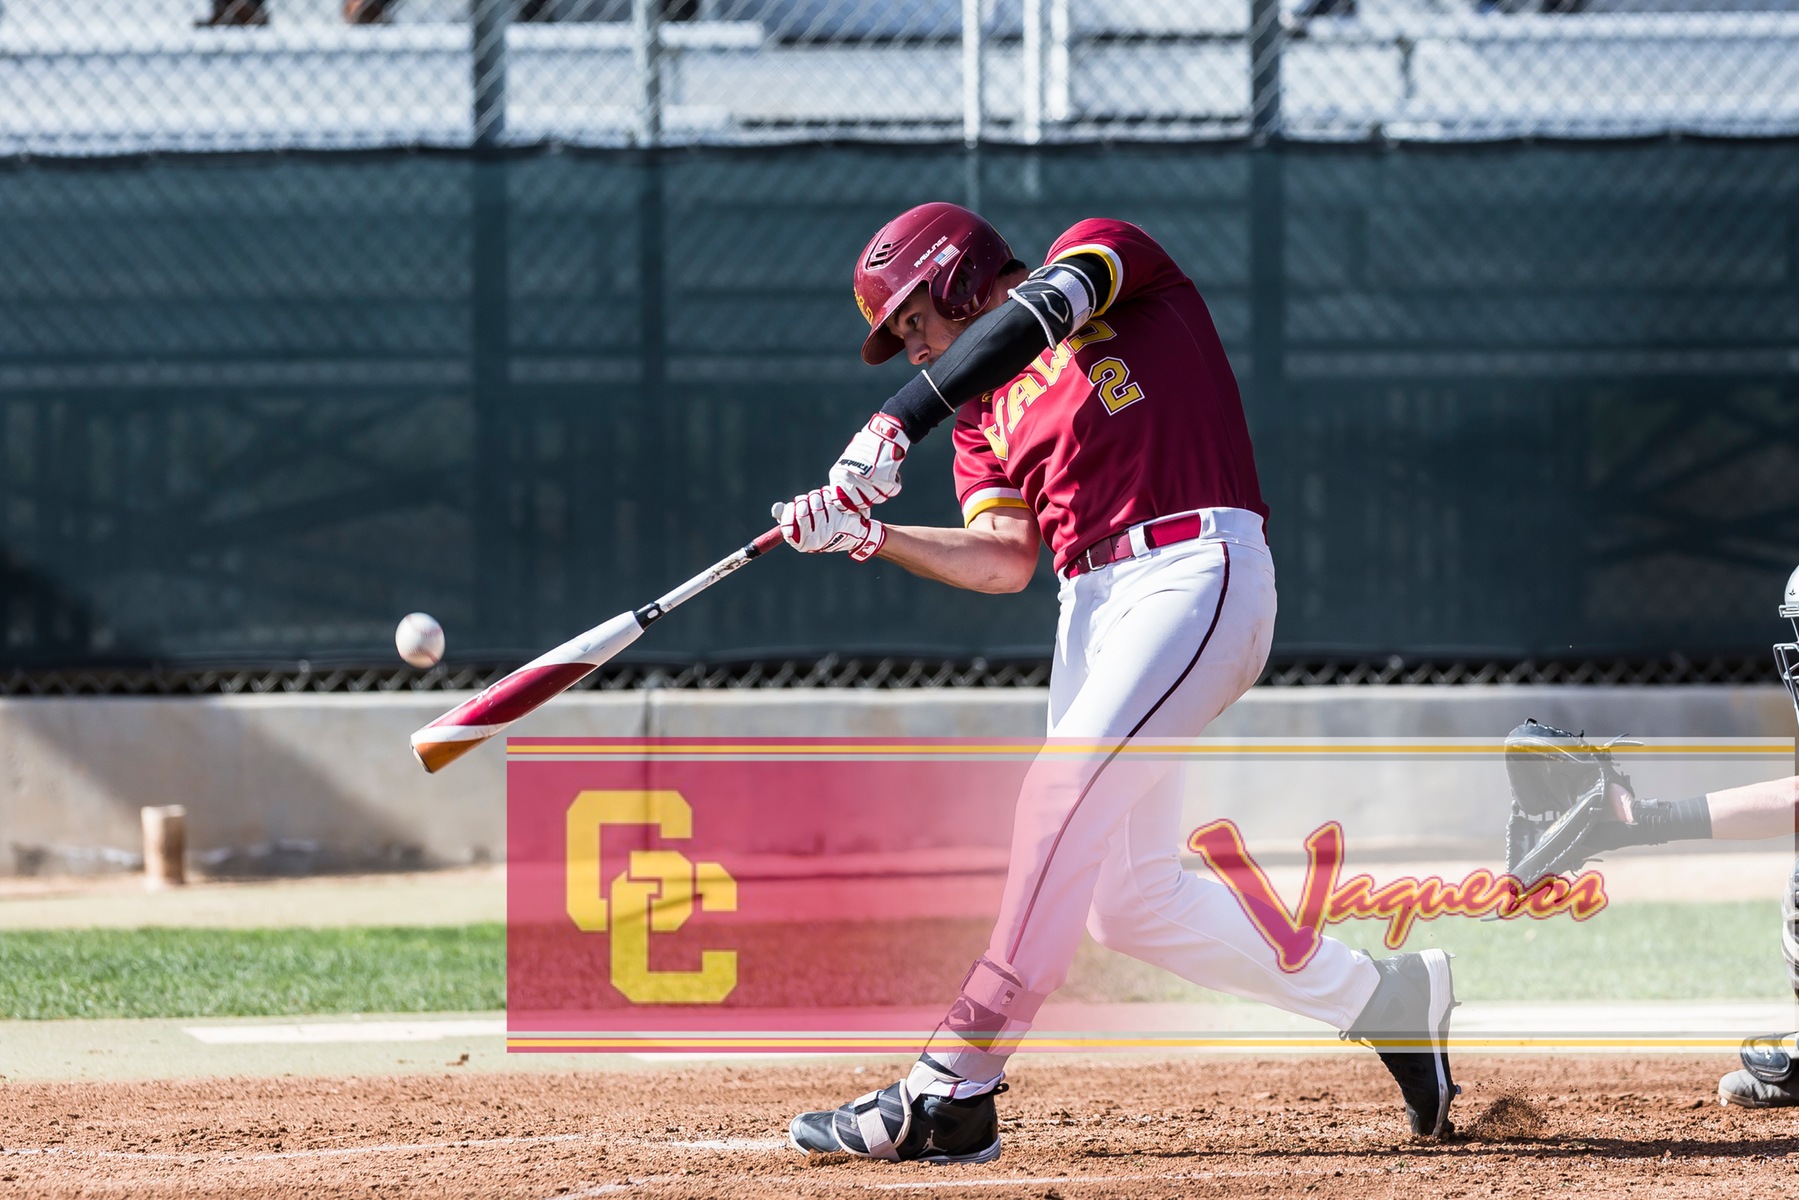 Troy Viola gets four hits, six RBI as GCC rallies for 9-5 win over Antelope Valley in 10 innings